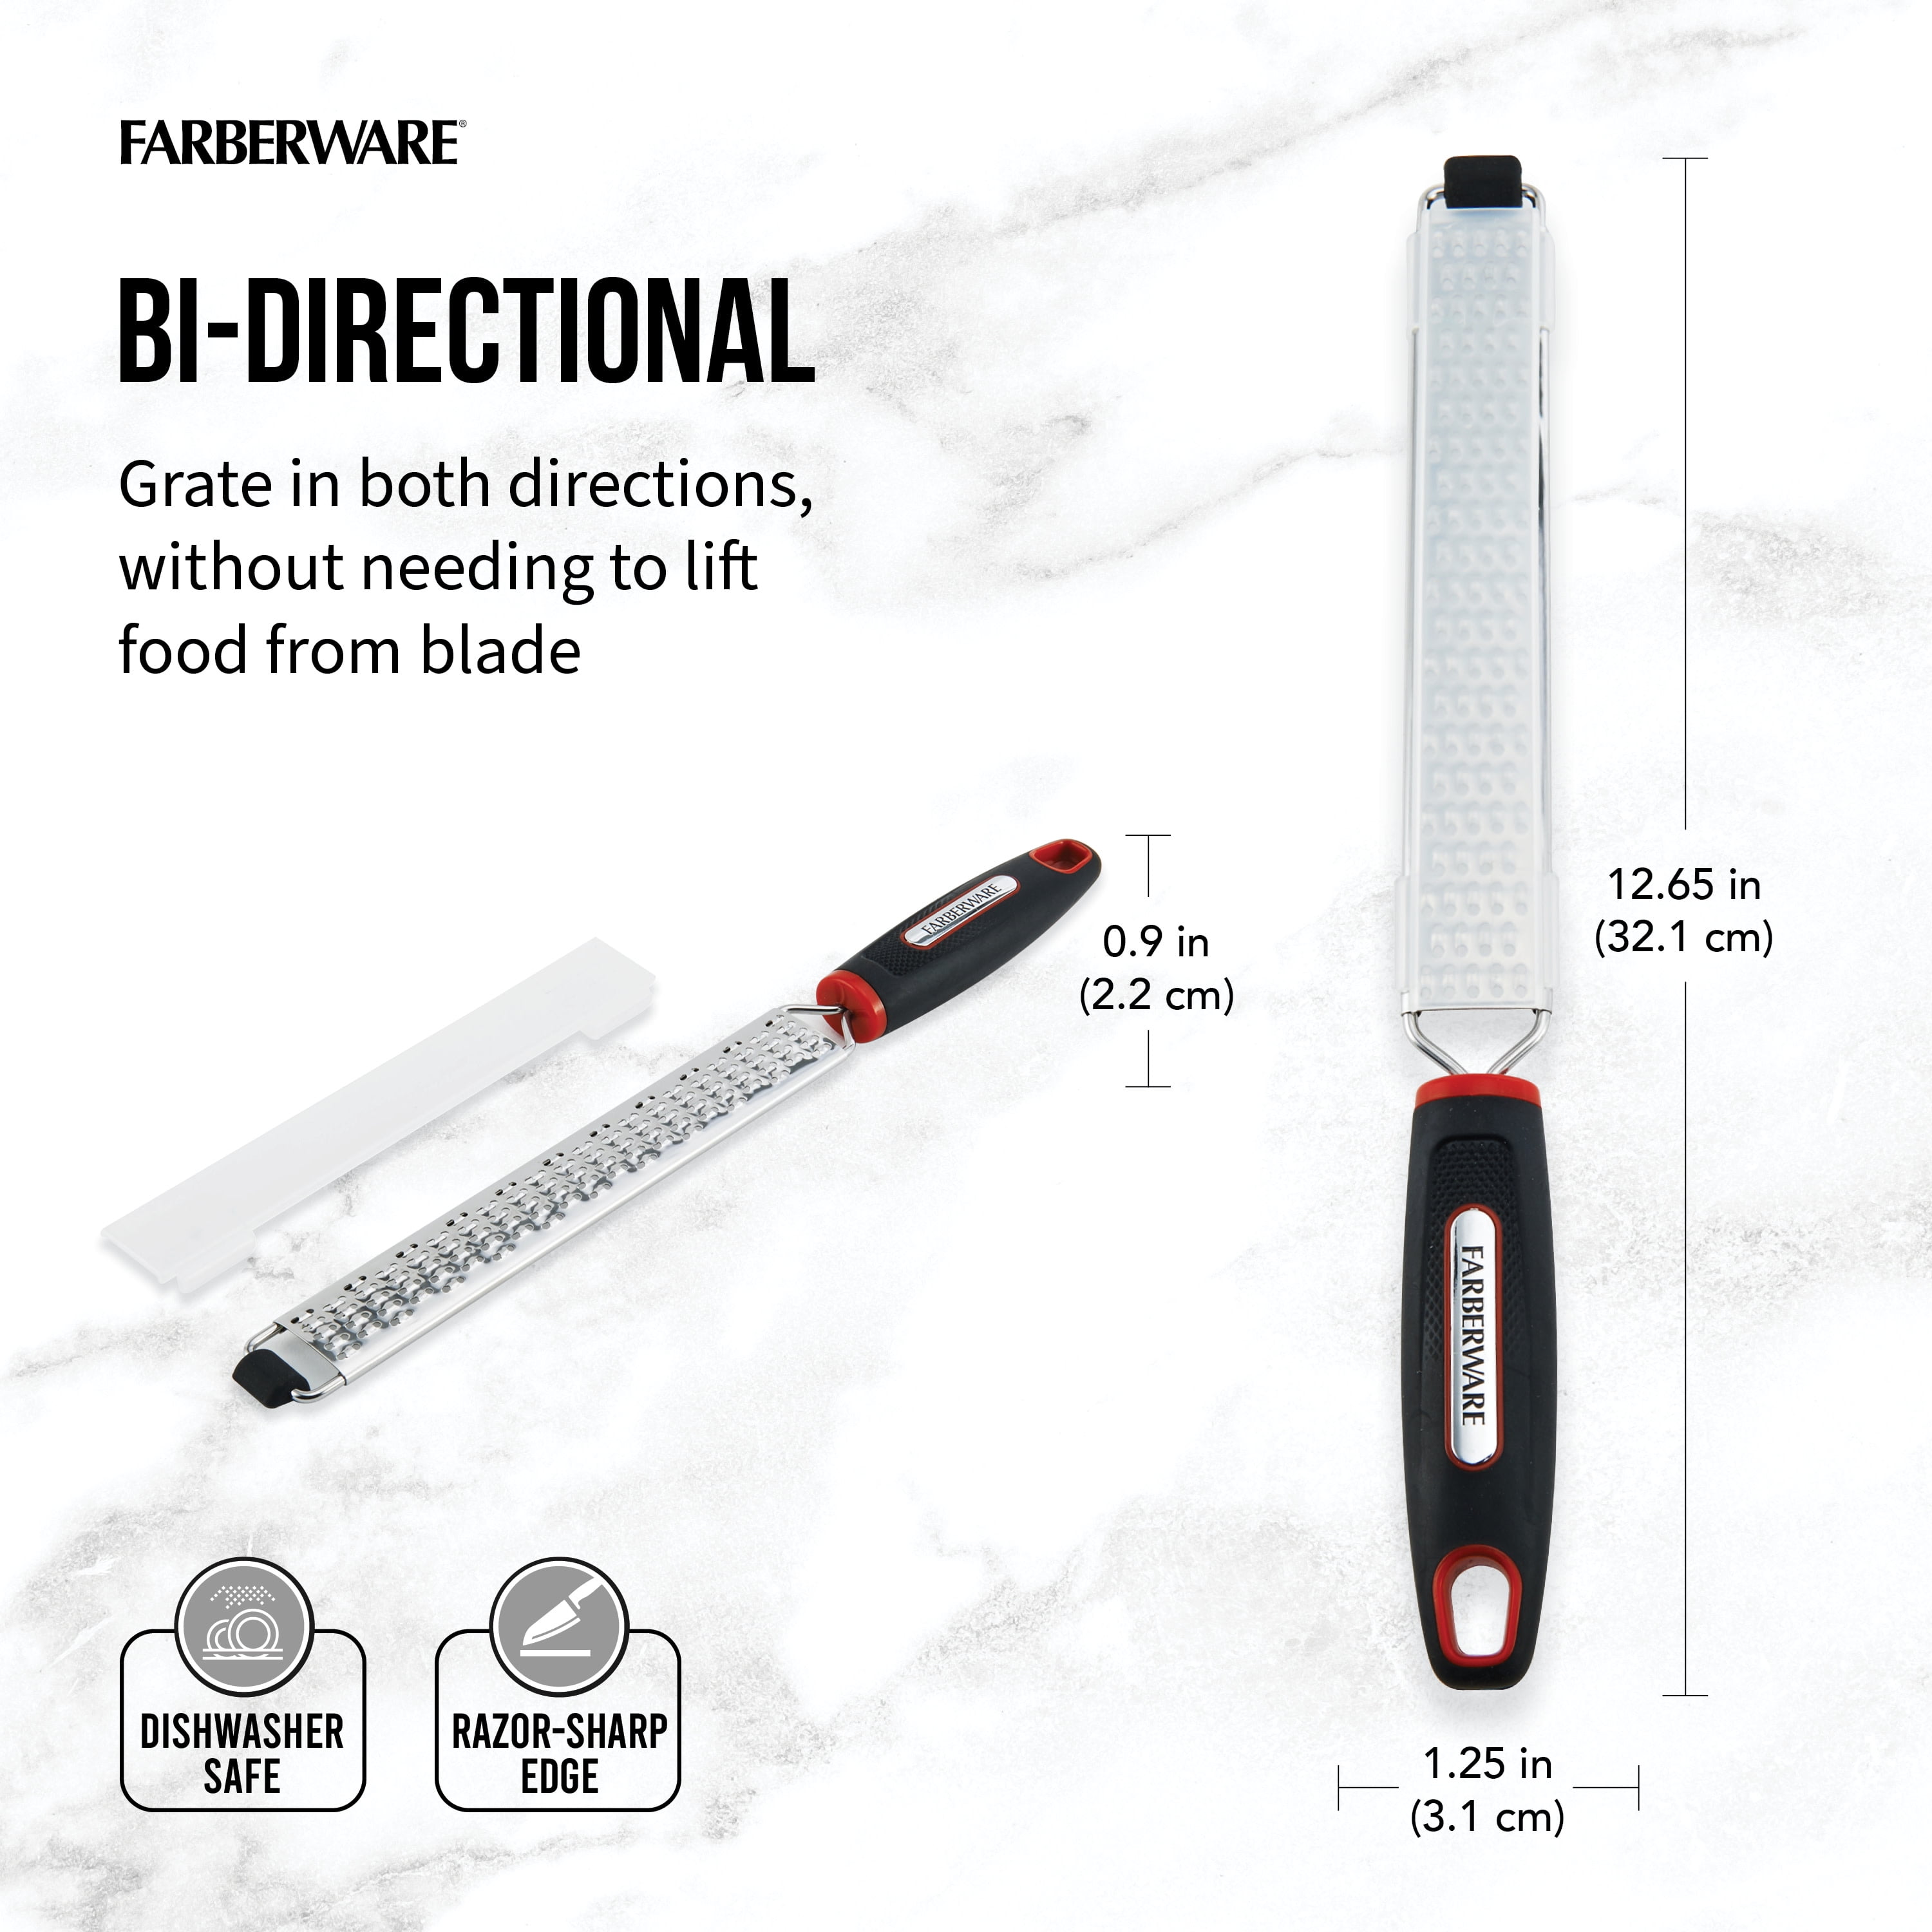 Farberware 1.6 in x 7.65 in Soft Grip Ceramic Blade Peeler Black with Red  Accents 